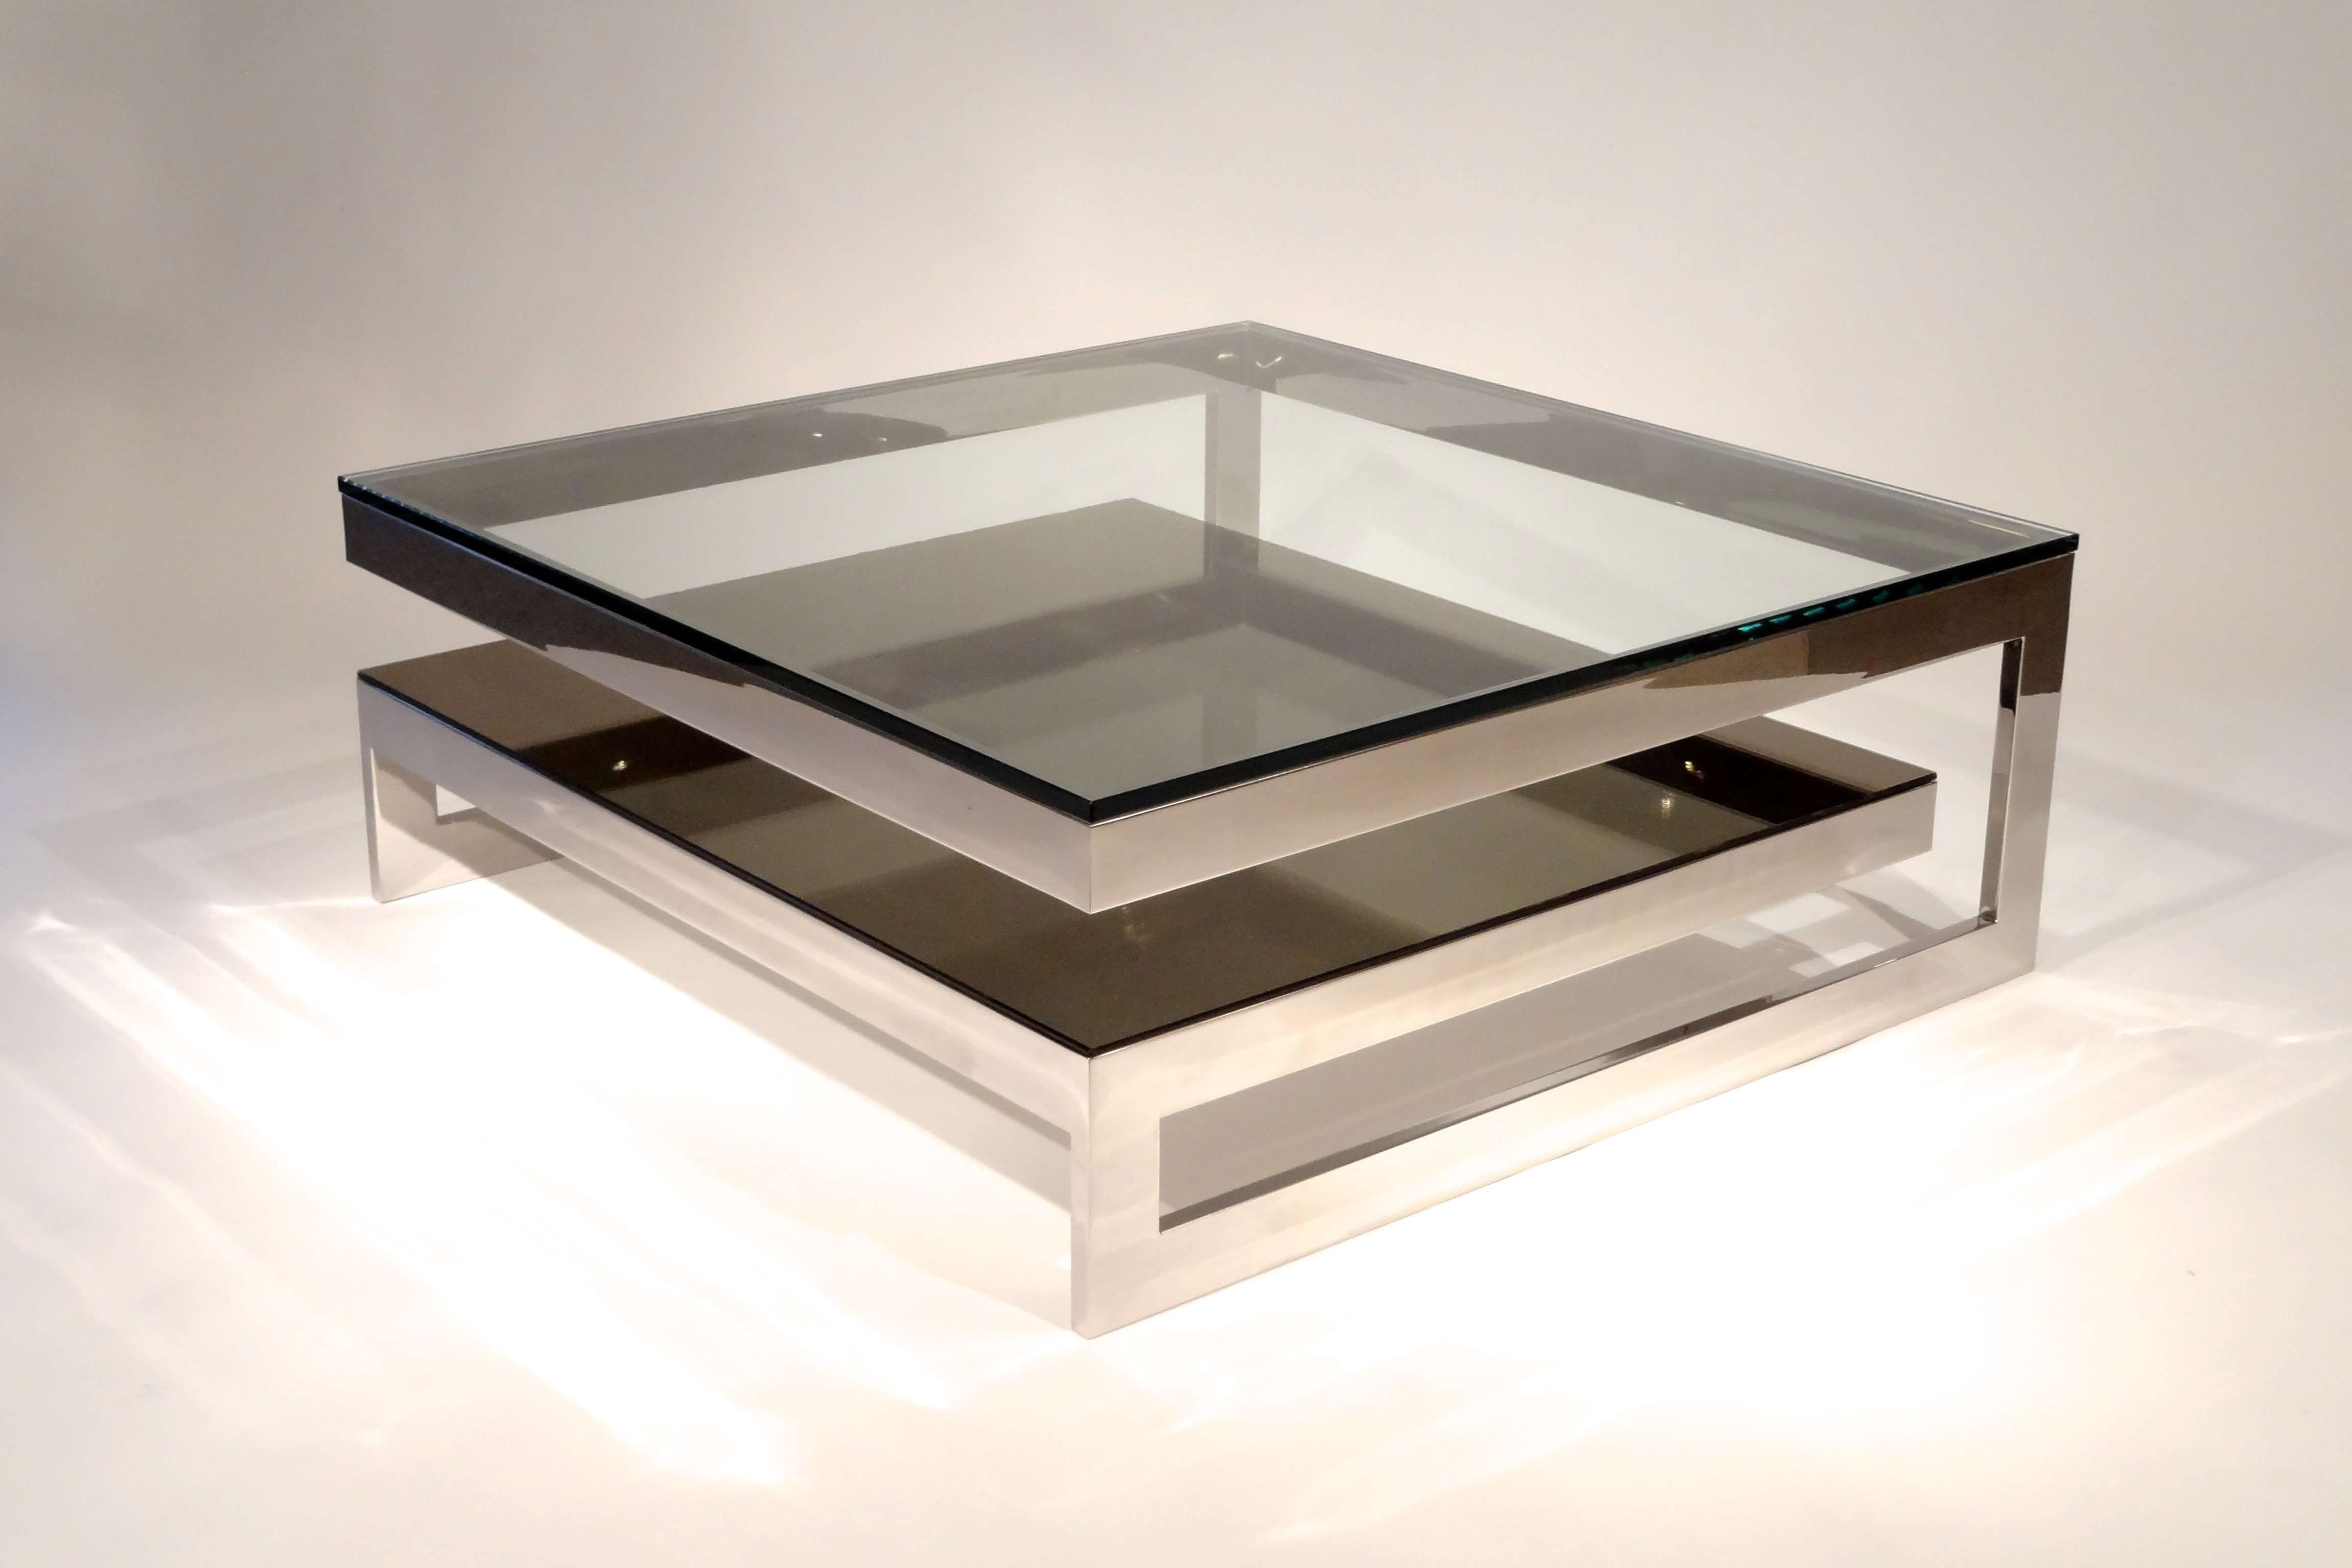 Coffee Tables : Judd Square Glass Coffee Table With Shelf Klarity Intended For Latest Square Glass Coffee Tables (View 13 of 20)